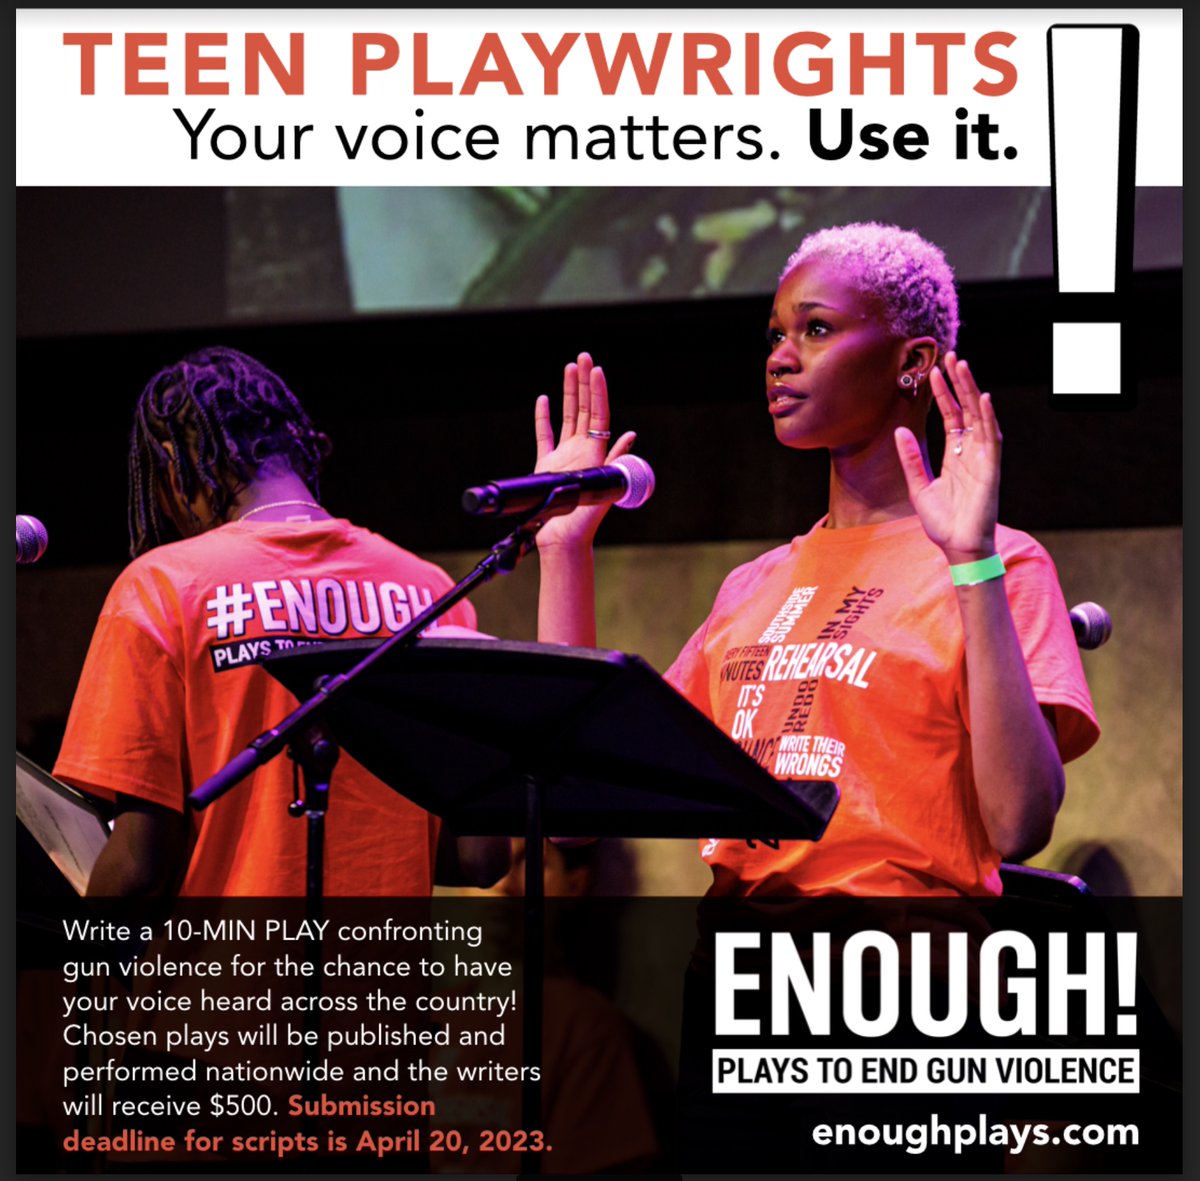 Our fellow ARTivists at @enoughplays want submissions from teens for 10 min. plays confronting #gunviolence. 
6 plays will be performed nationwide & the writers win $500. 
Deadline: 4/20/23
More: enoughplays.com
#WeSayENOUGH #youngplaywrights #youngwriters #teenwriters